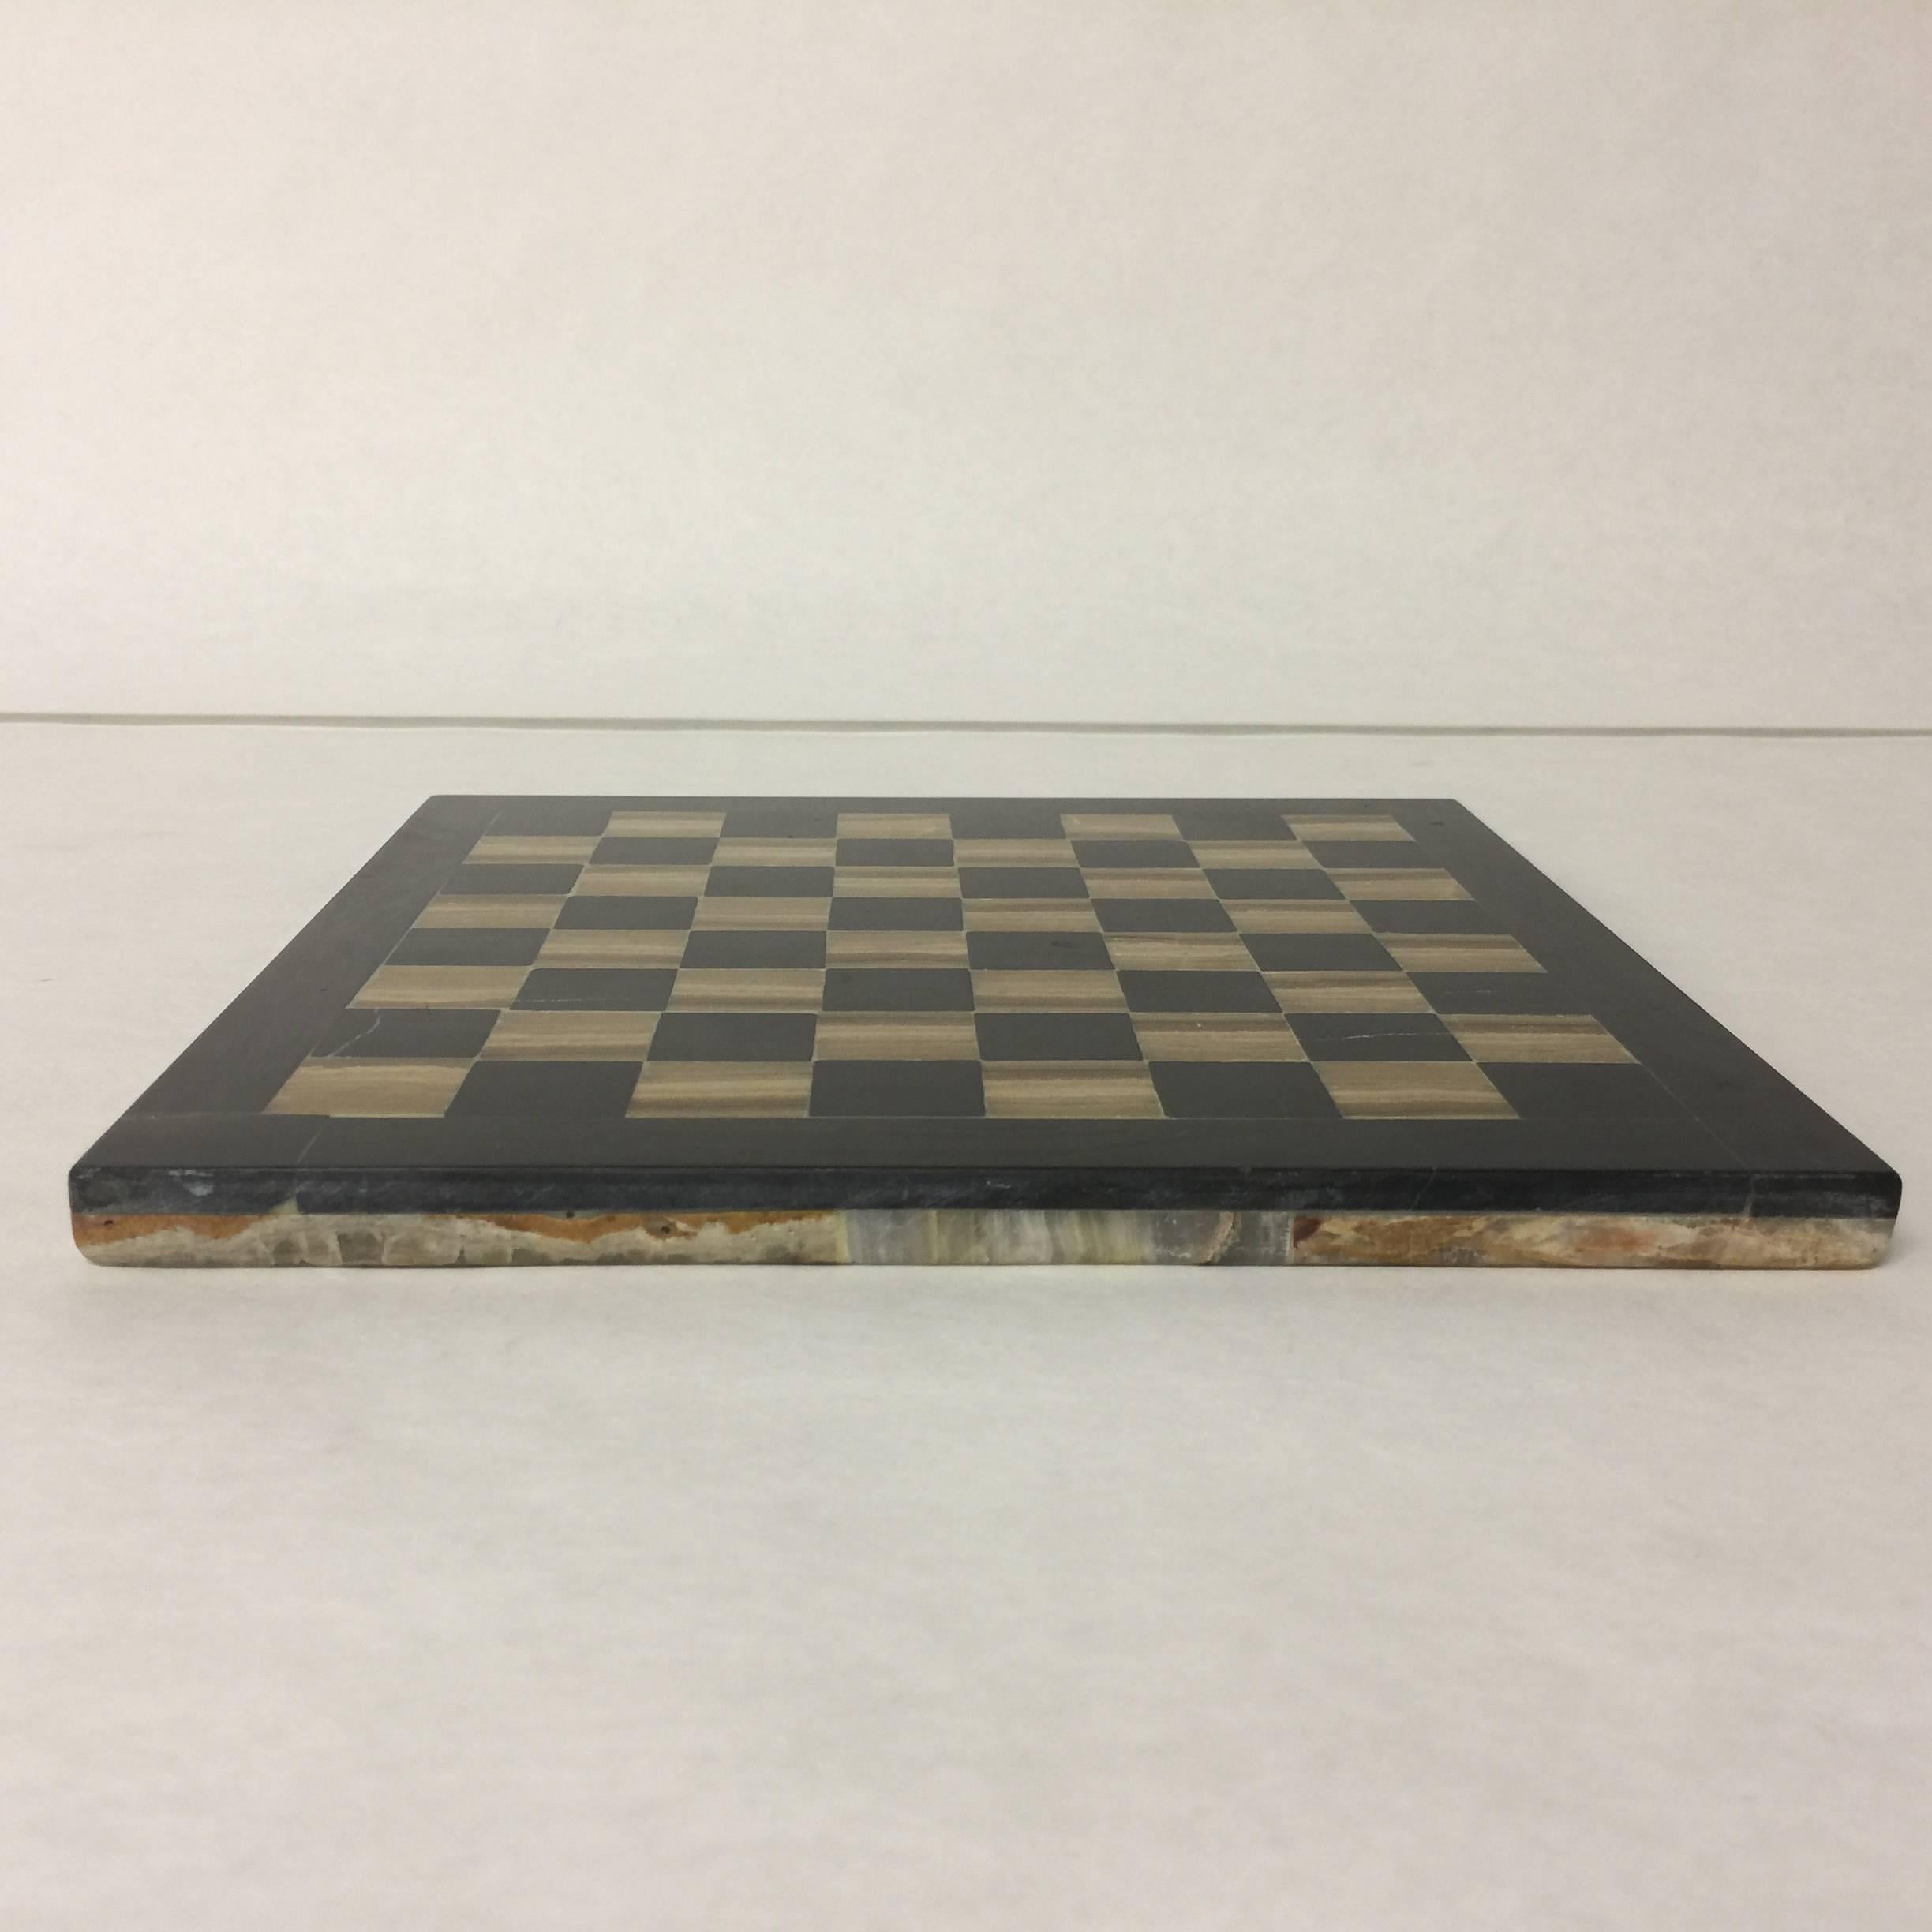 20th Century Diminutive Vintage Agate Chess or Checkers Board in Black and Gold, Pieced Side